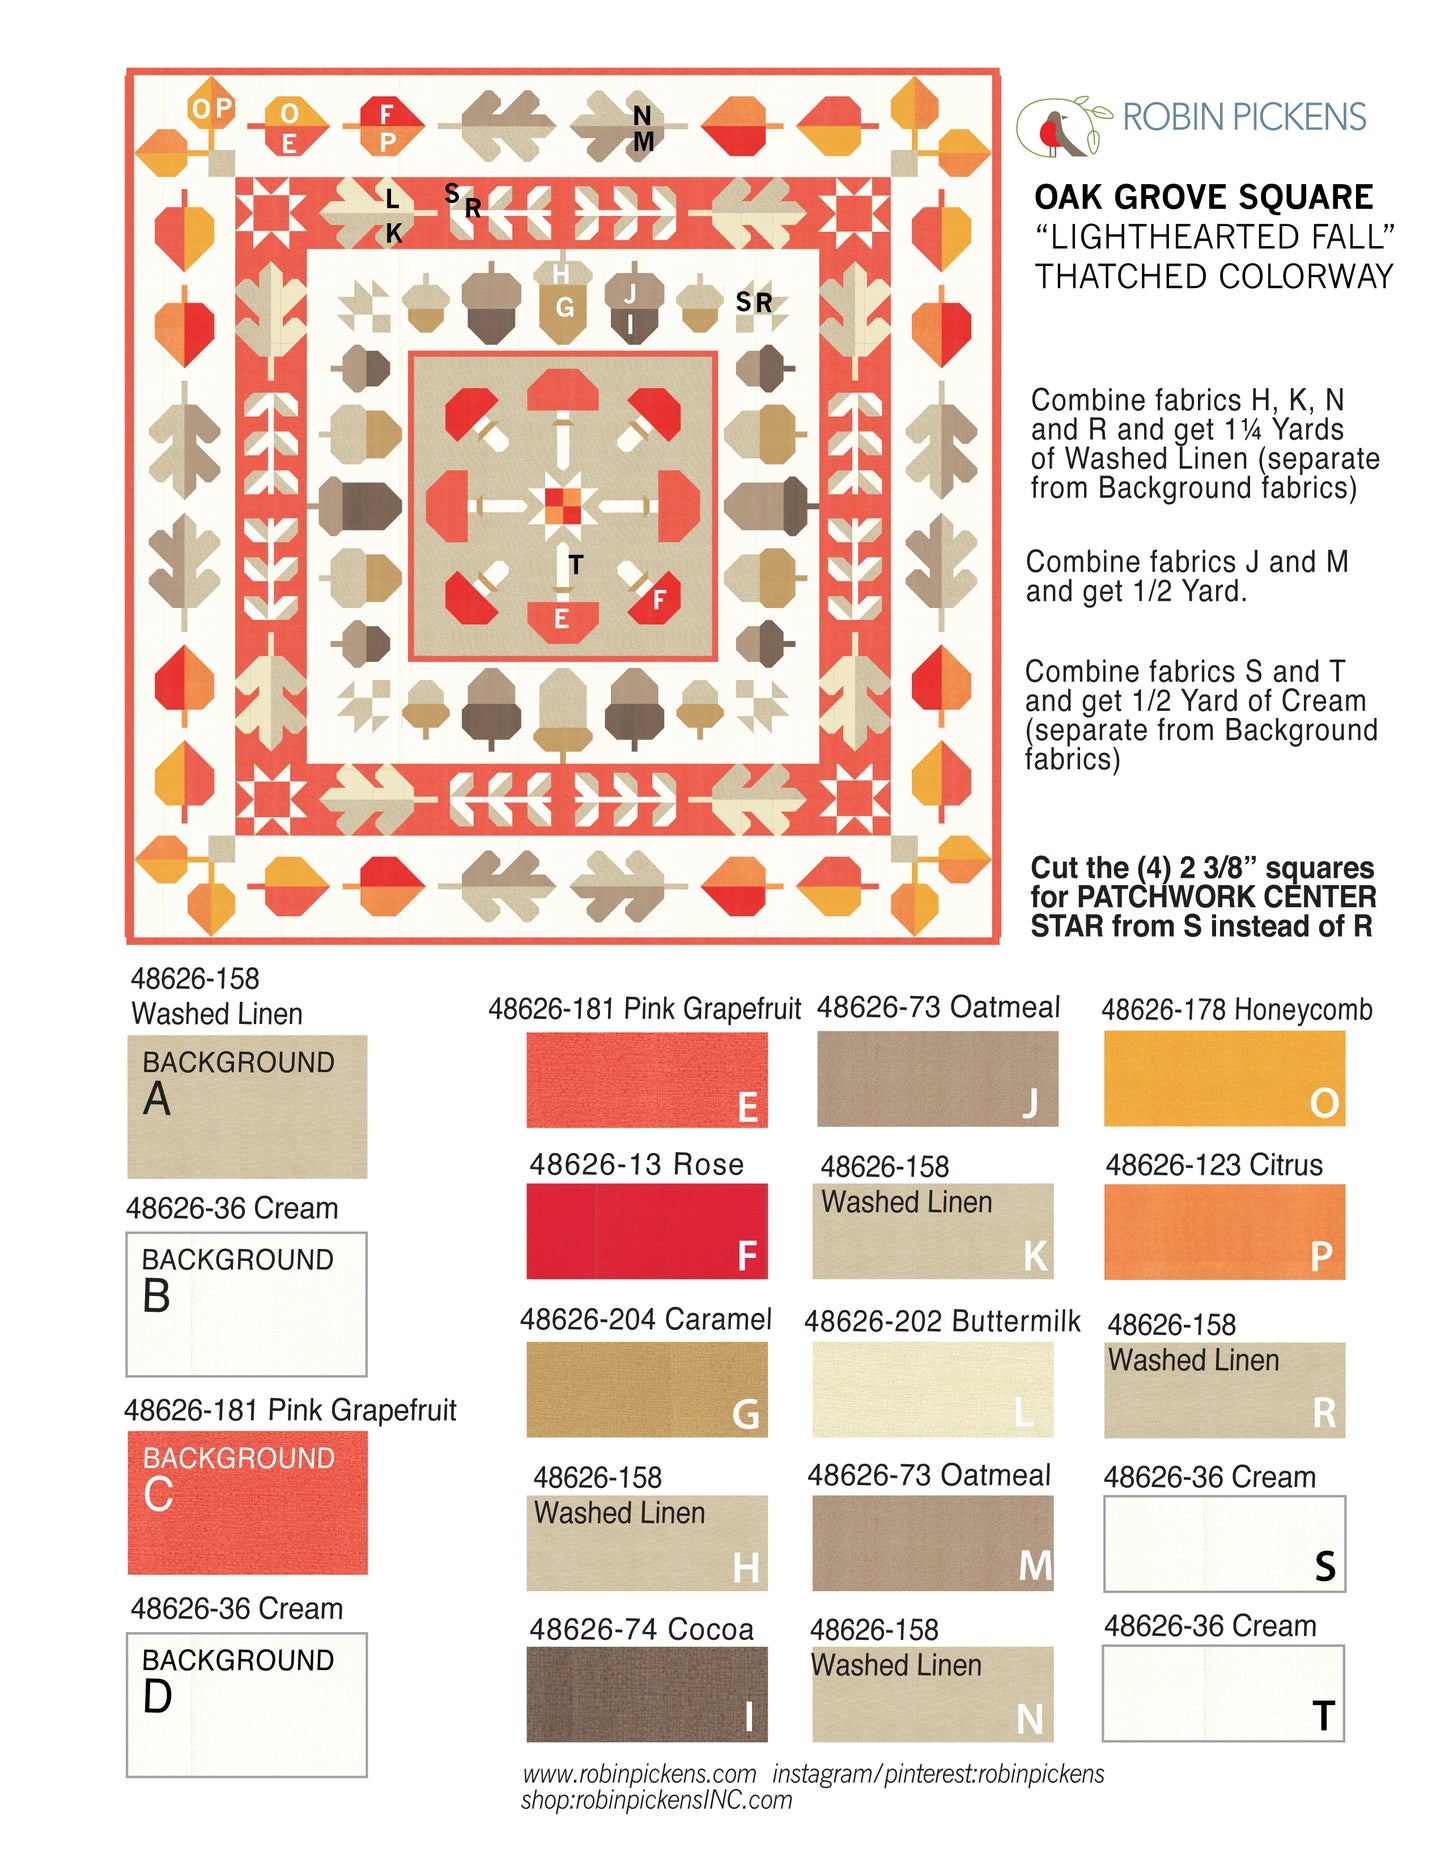 A Quilt KIT of Oak Grove Square in Thatched- LIGHTHEARTED FALL colorway